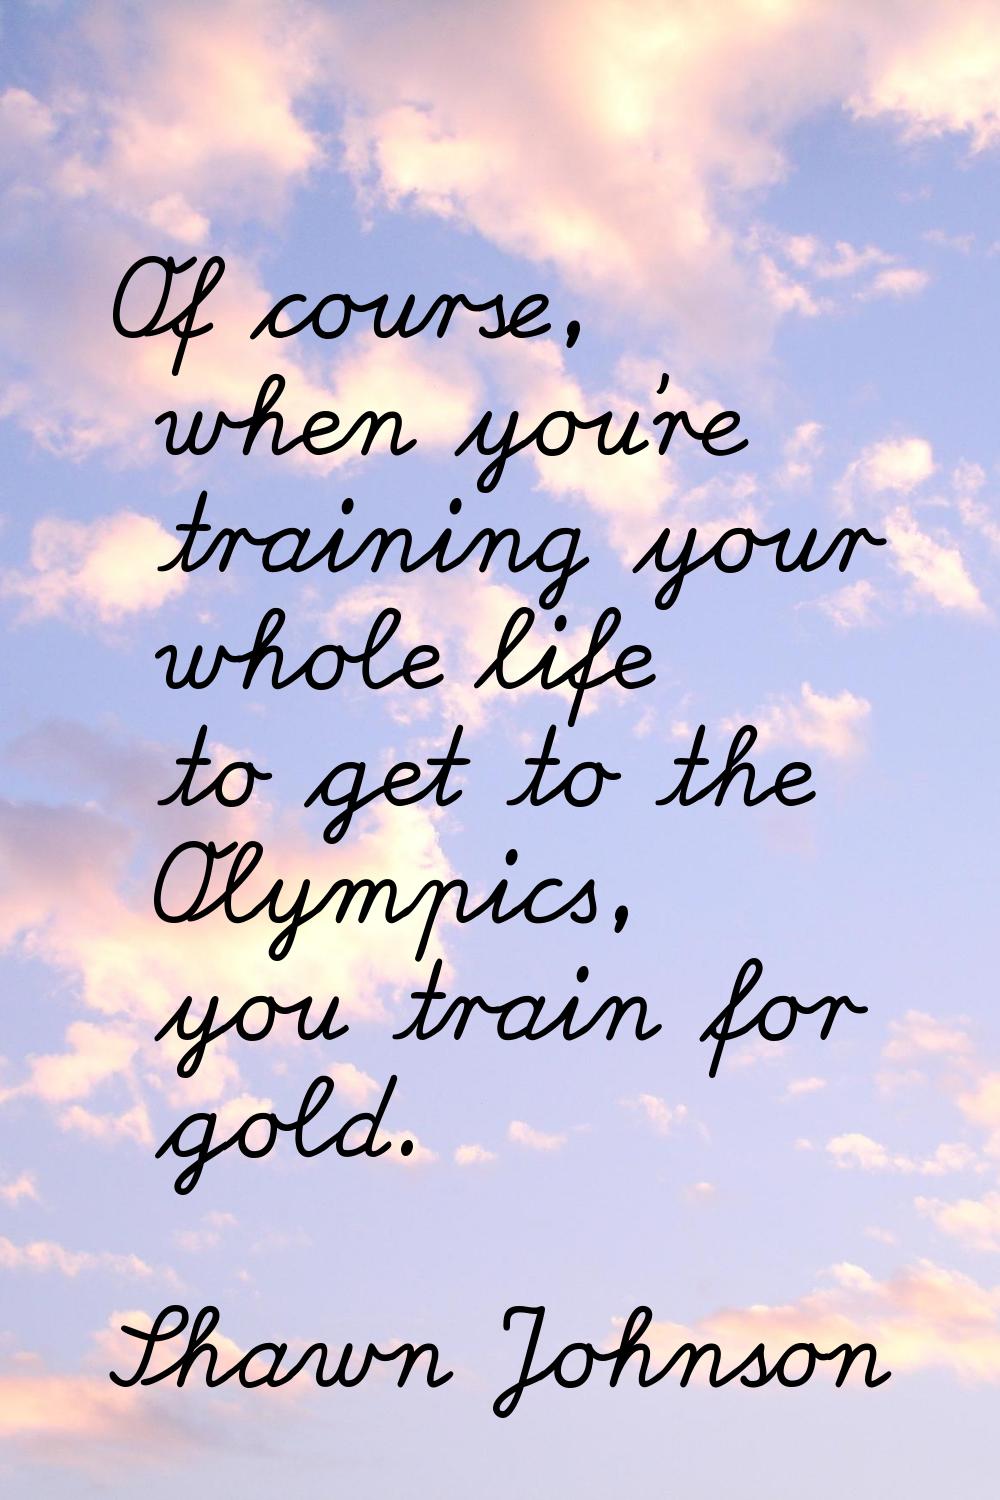 Of course, when you're training your whole life to get to the Olympics, you train for gold.